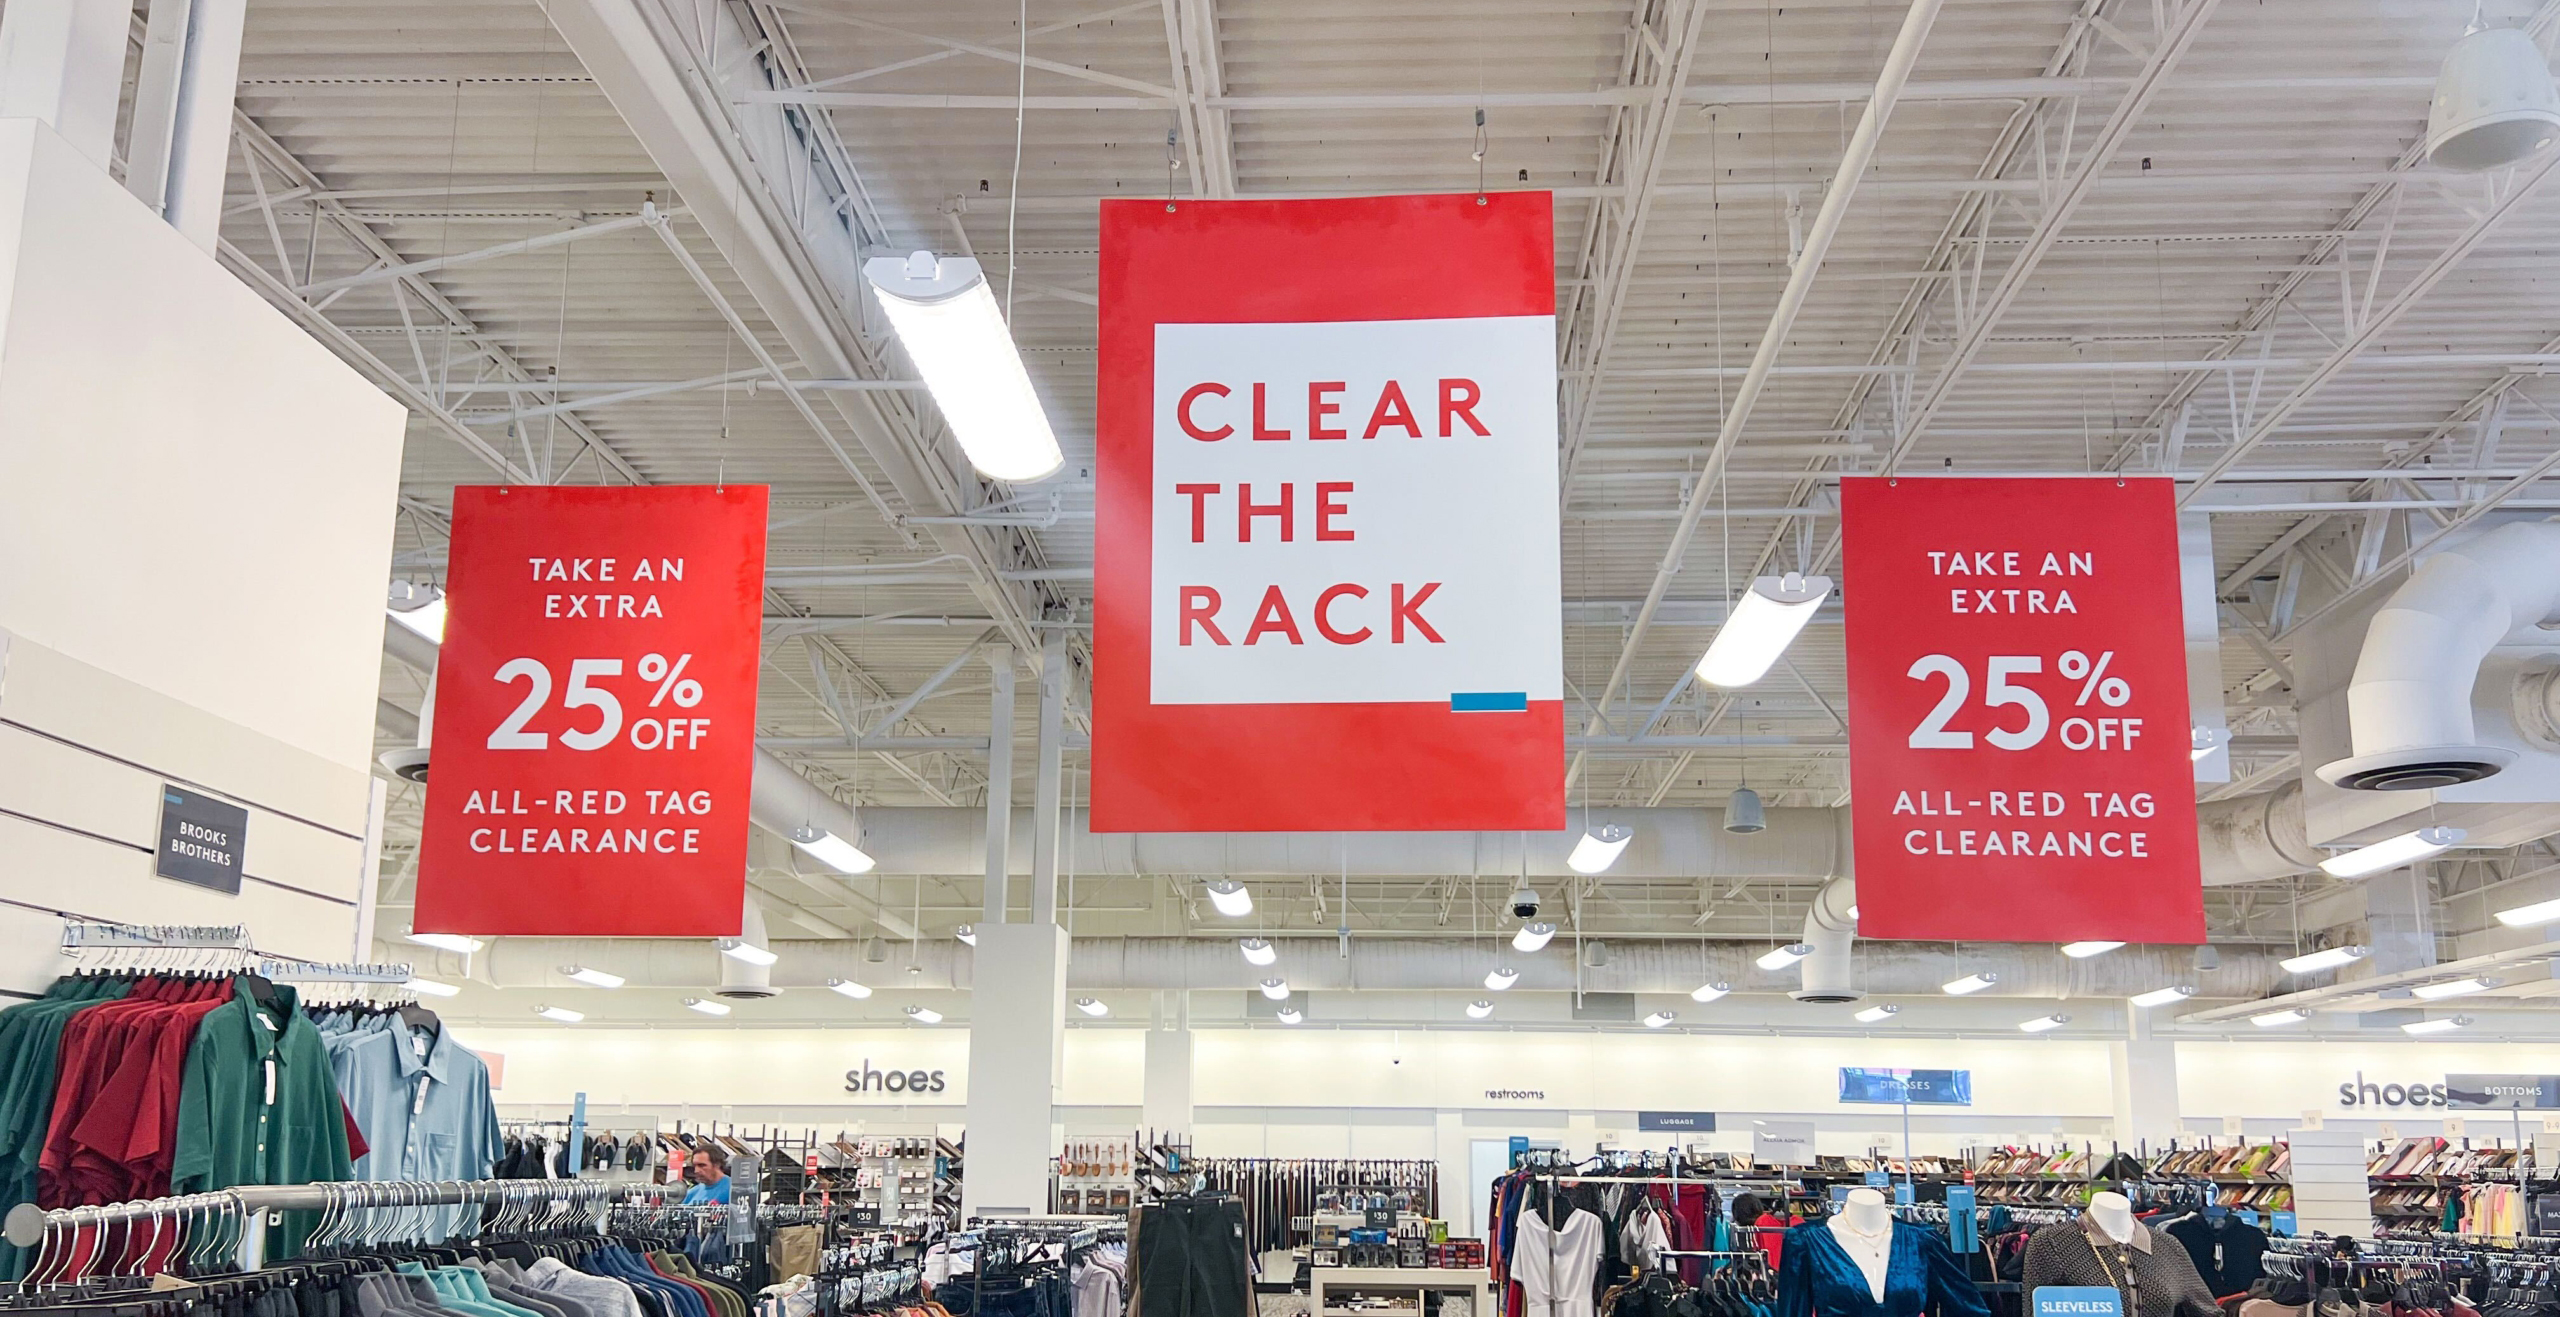 Nordstrom Rack sale: Clear The Rack has an extra 25% off designer styles